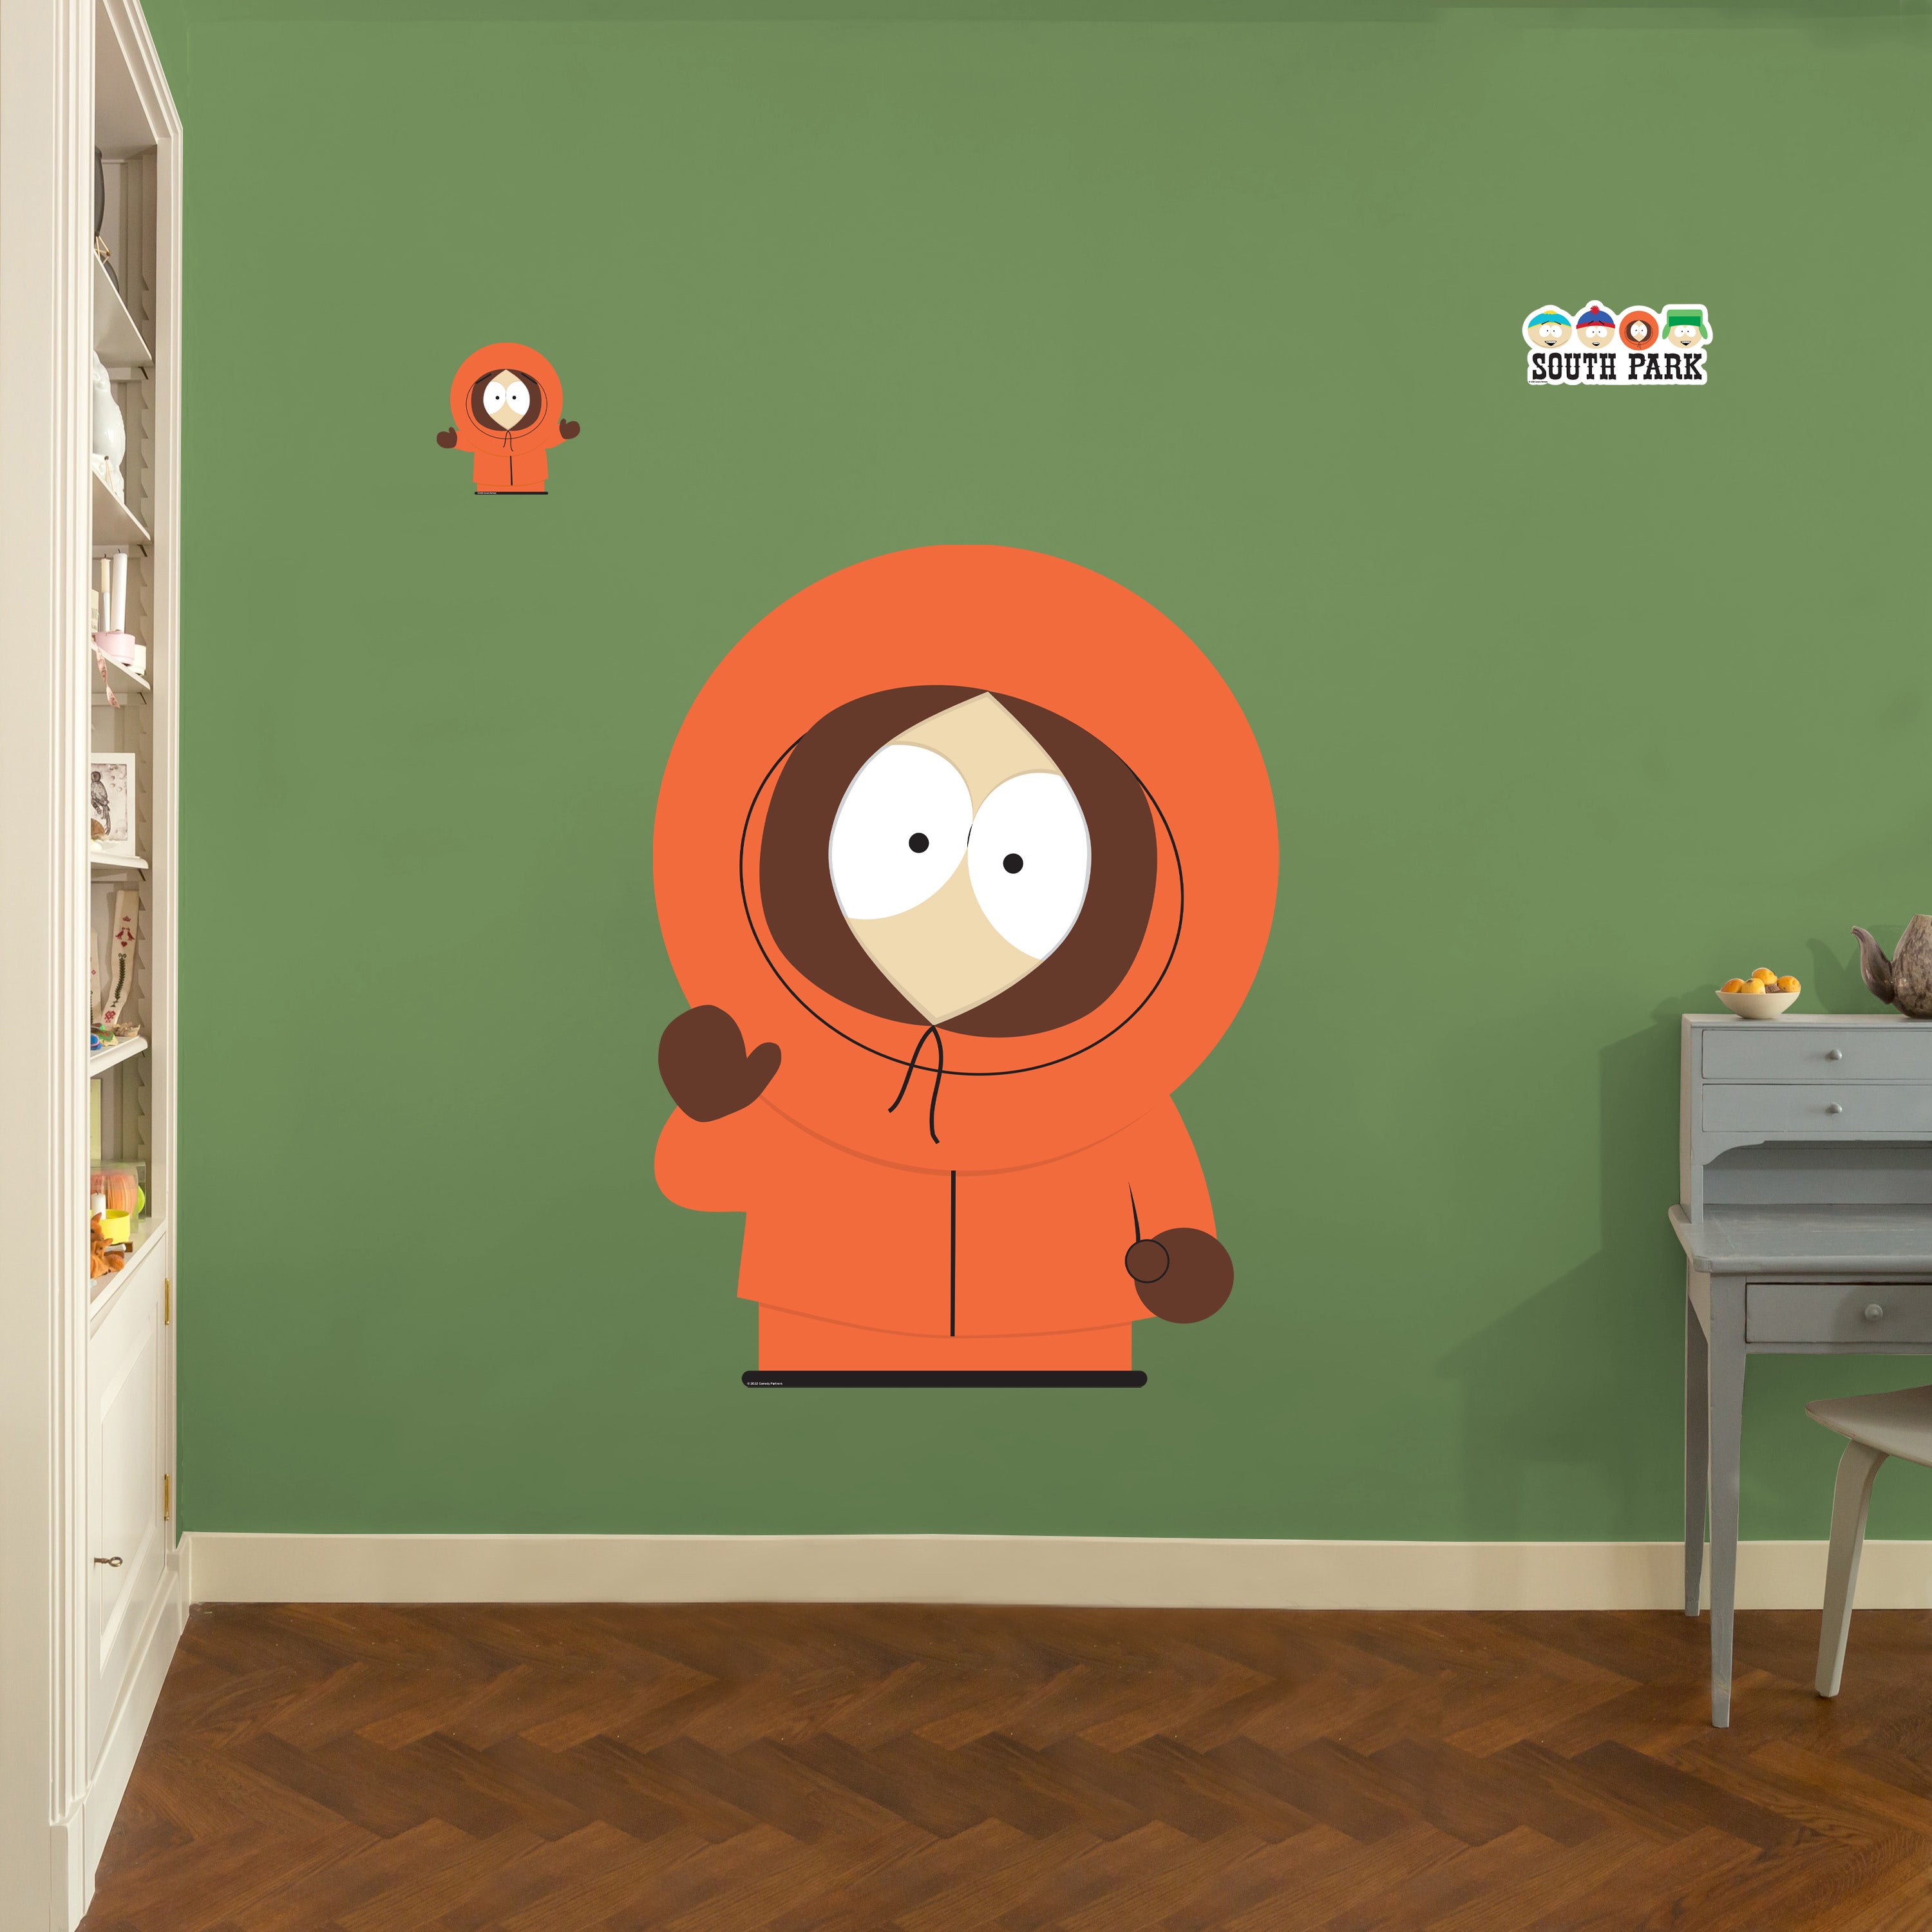 South Park: Characters Collection - Officially Licensed Paramount Removable  Adhesive Decal